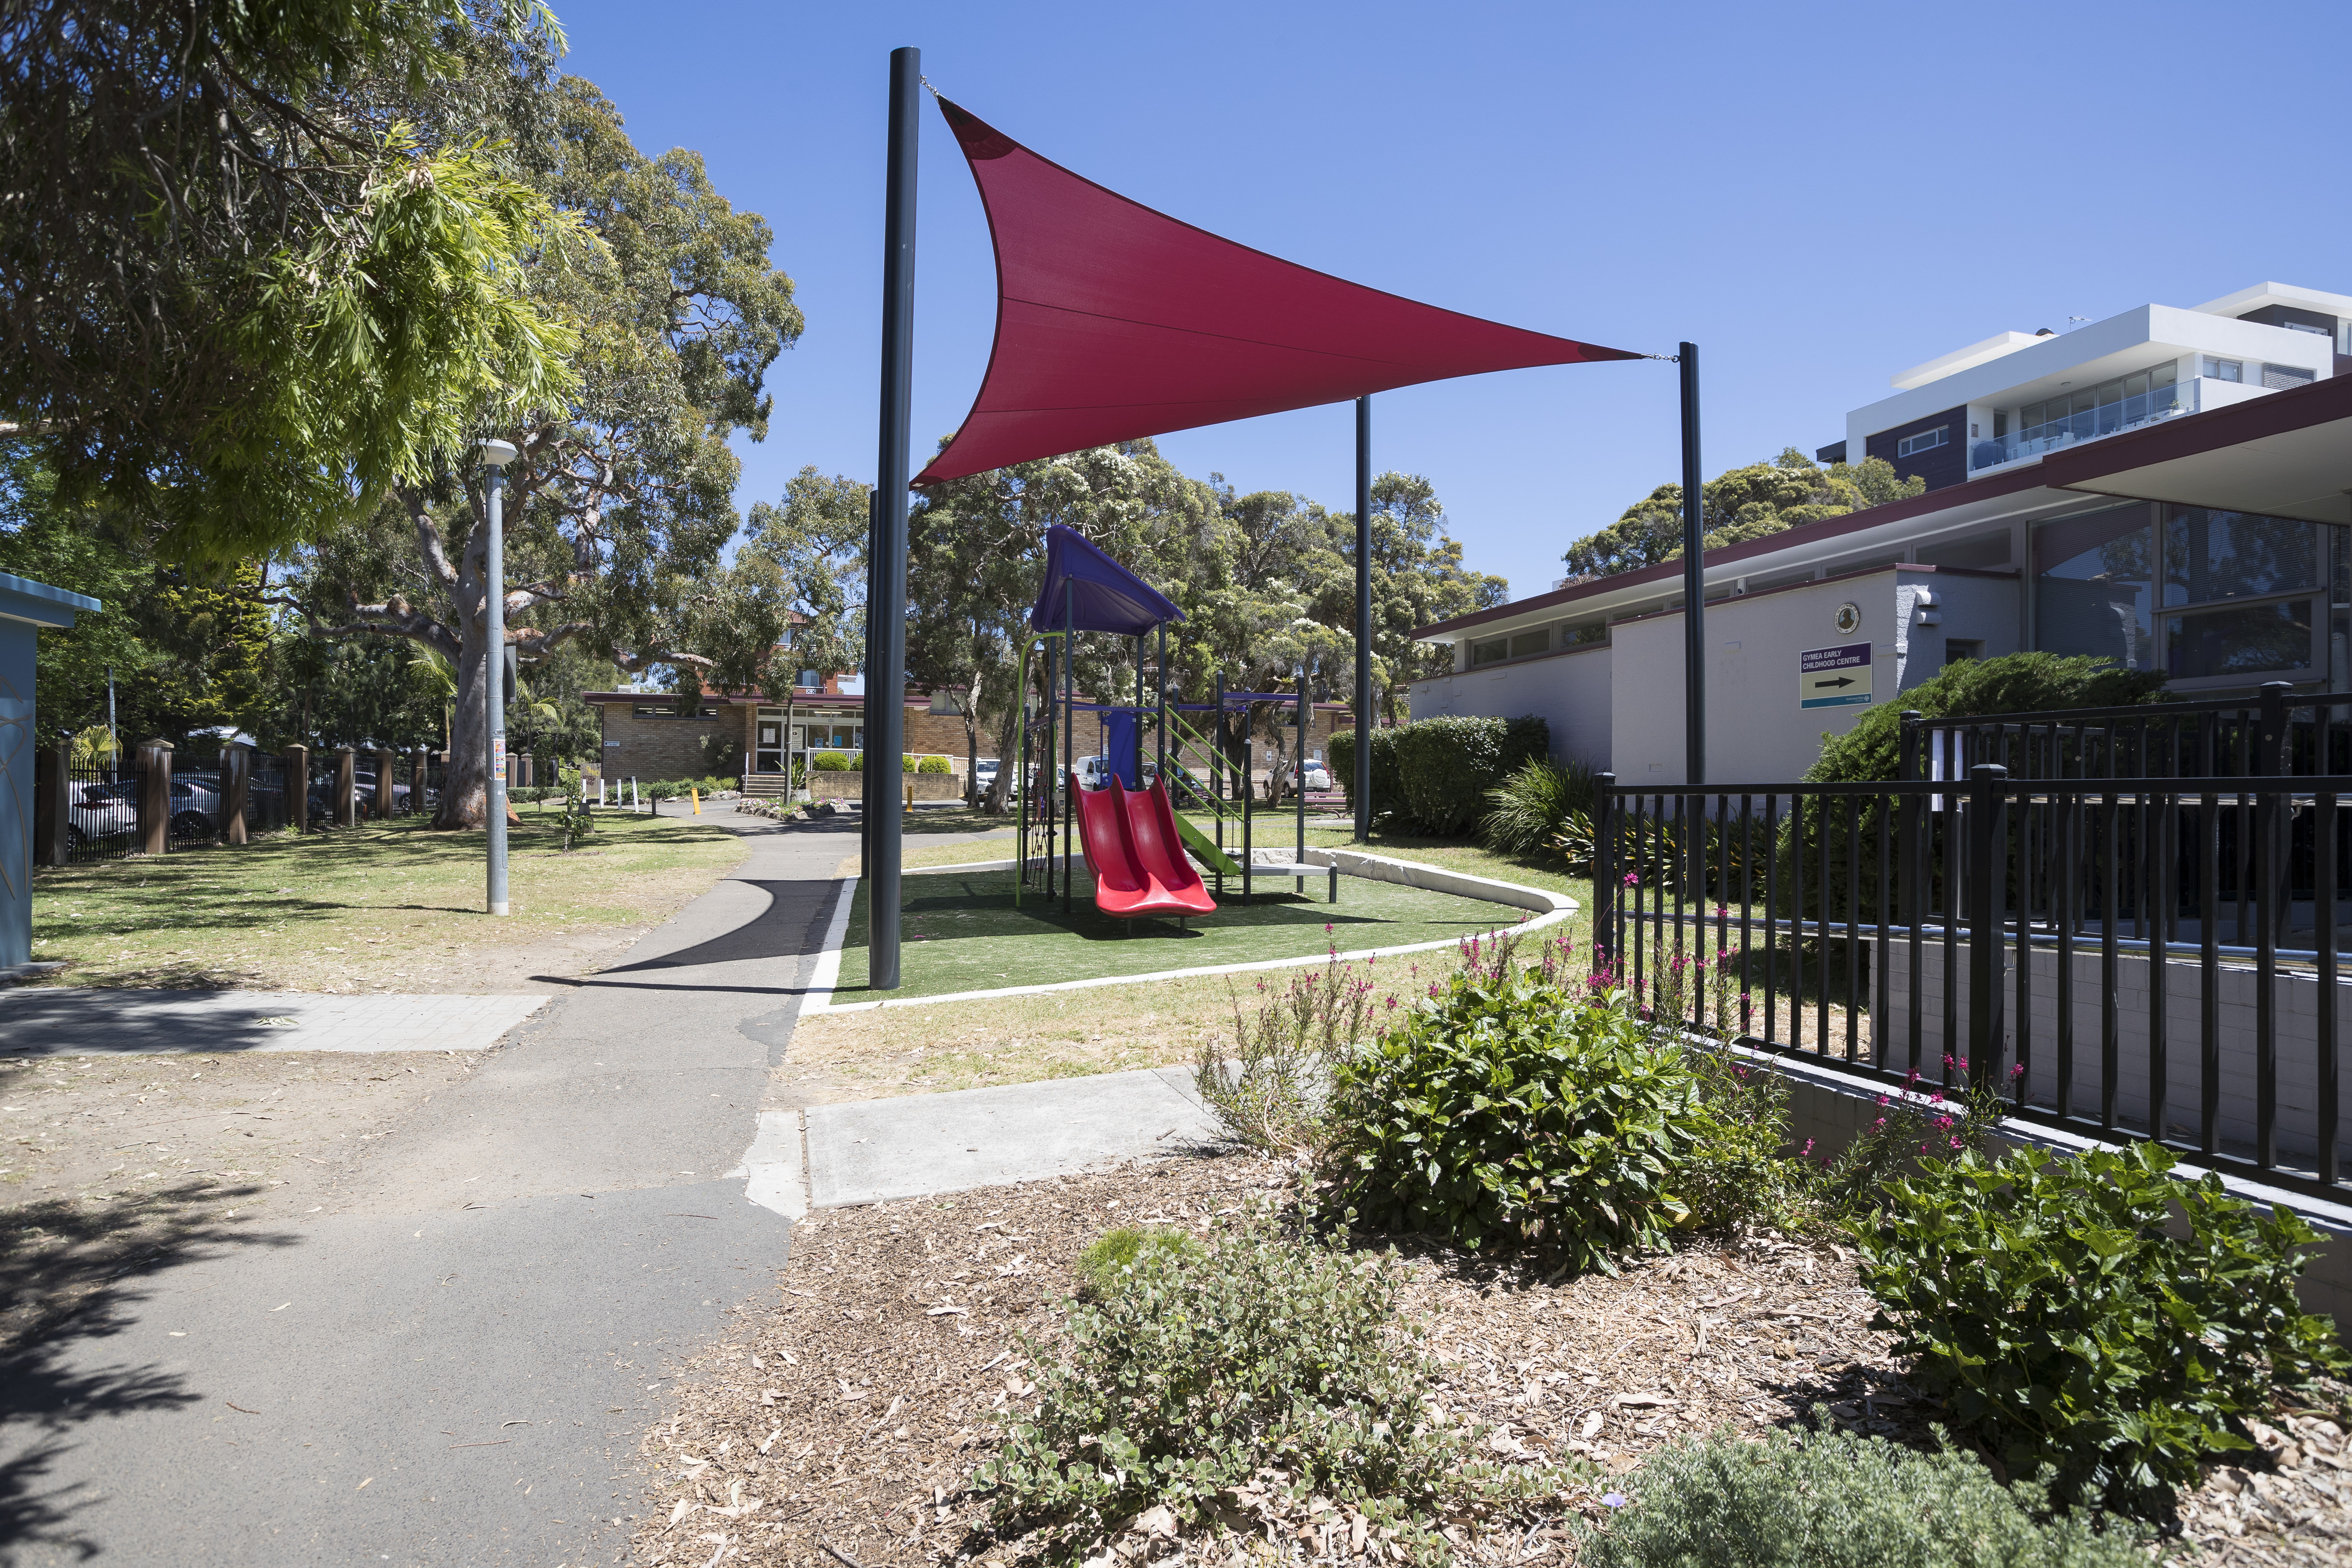 Playground with red shade sail